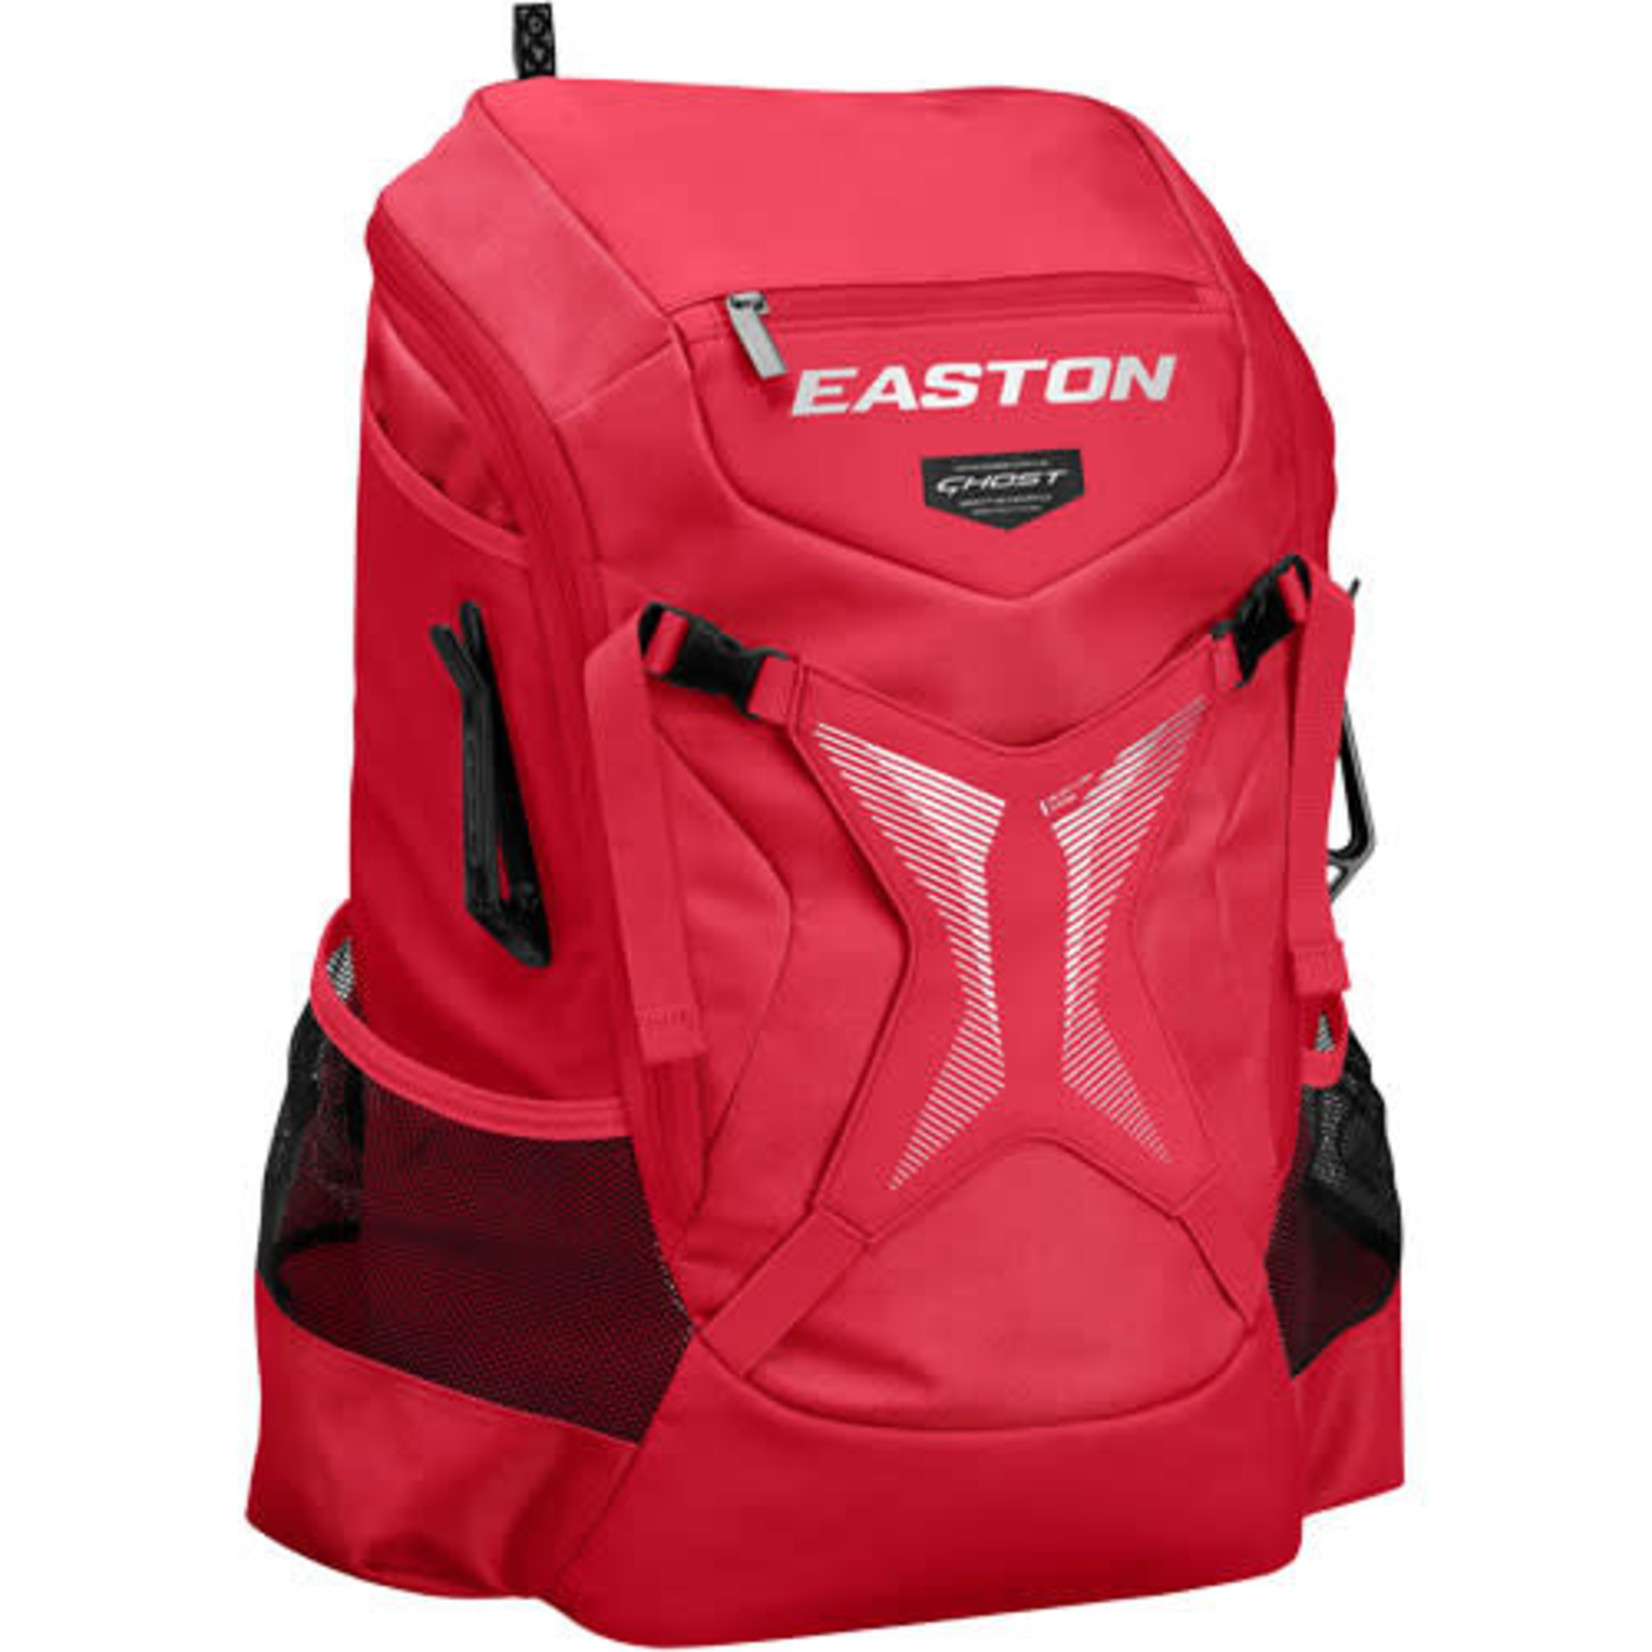 Easton Easton Ghost NX Fastpitch Backpack